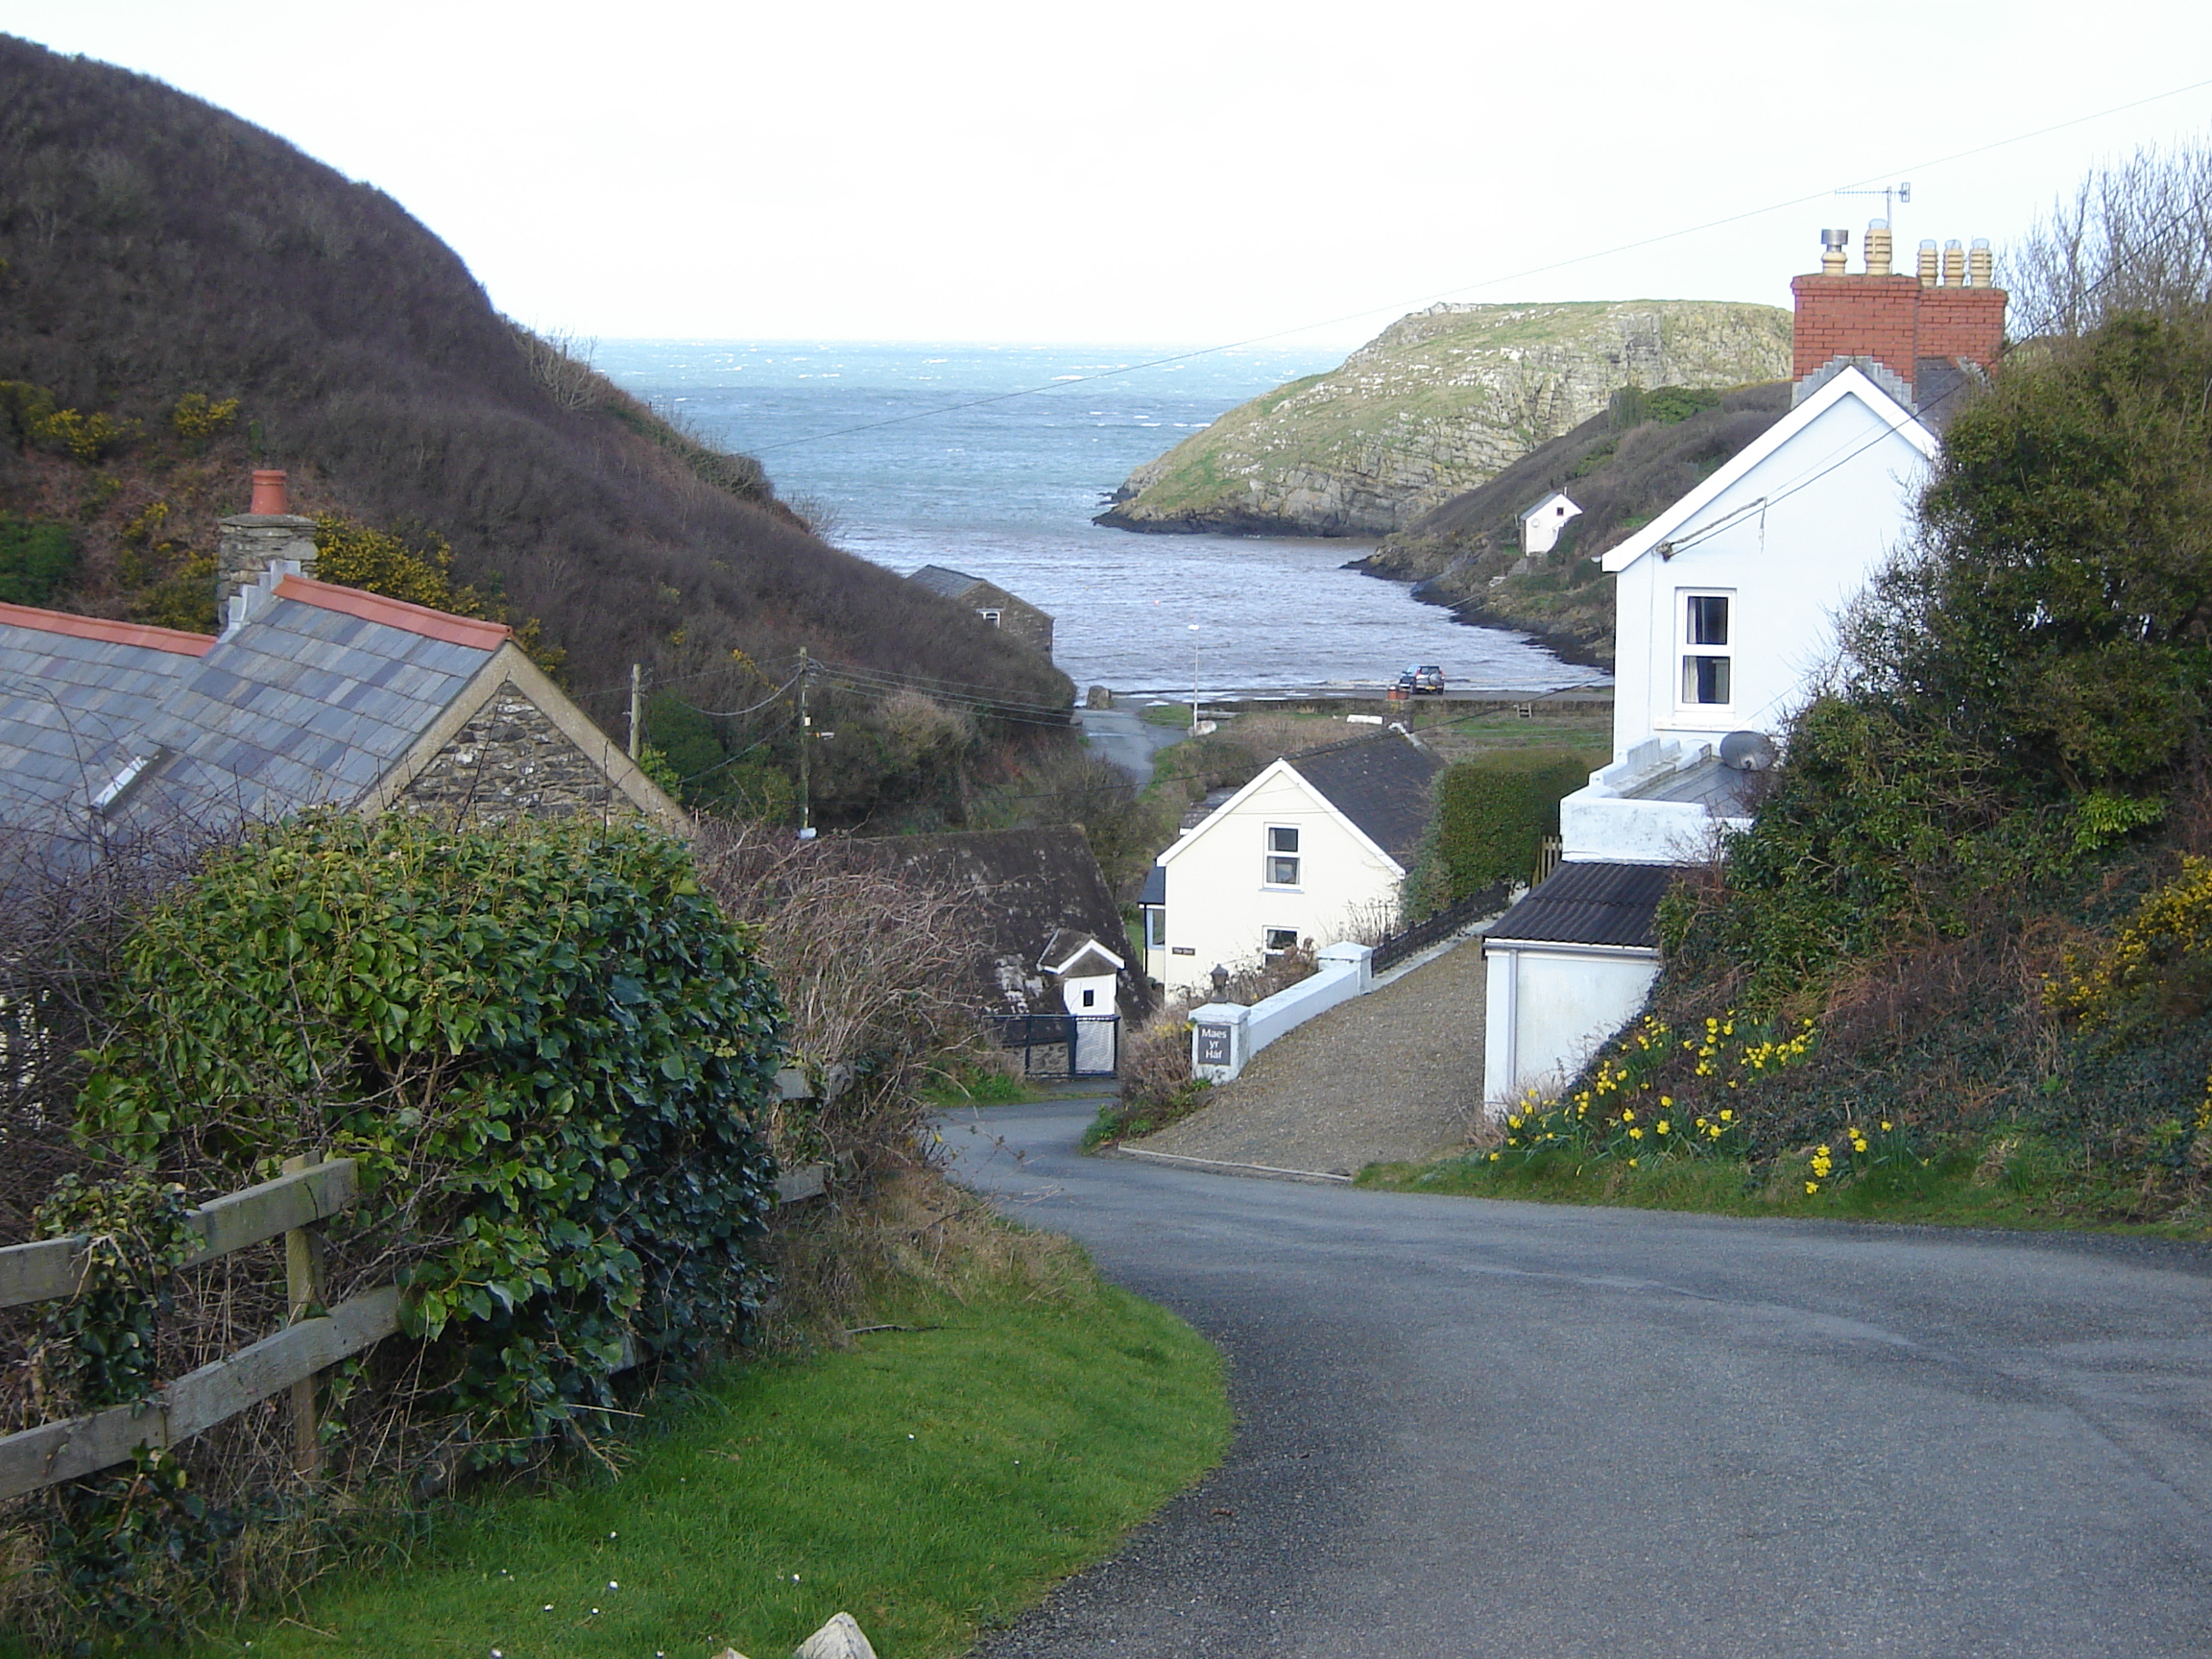 Looking out from Abercastle towards the site